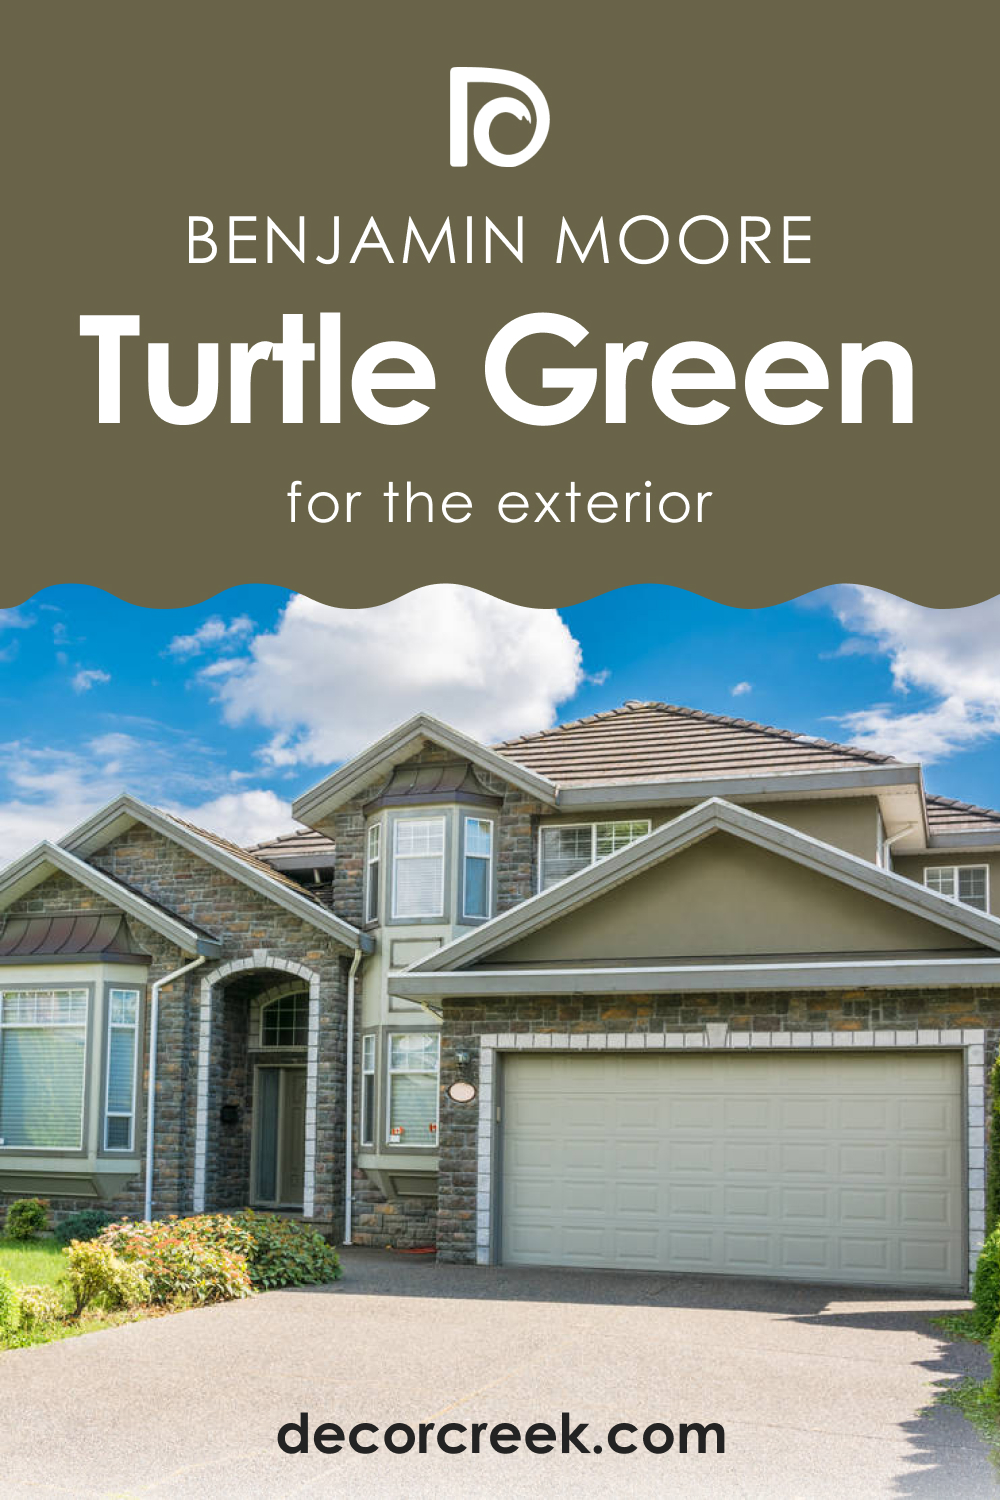 Turtle Green 2142-20 for an Exterior